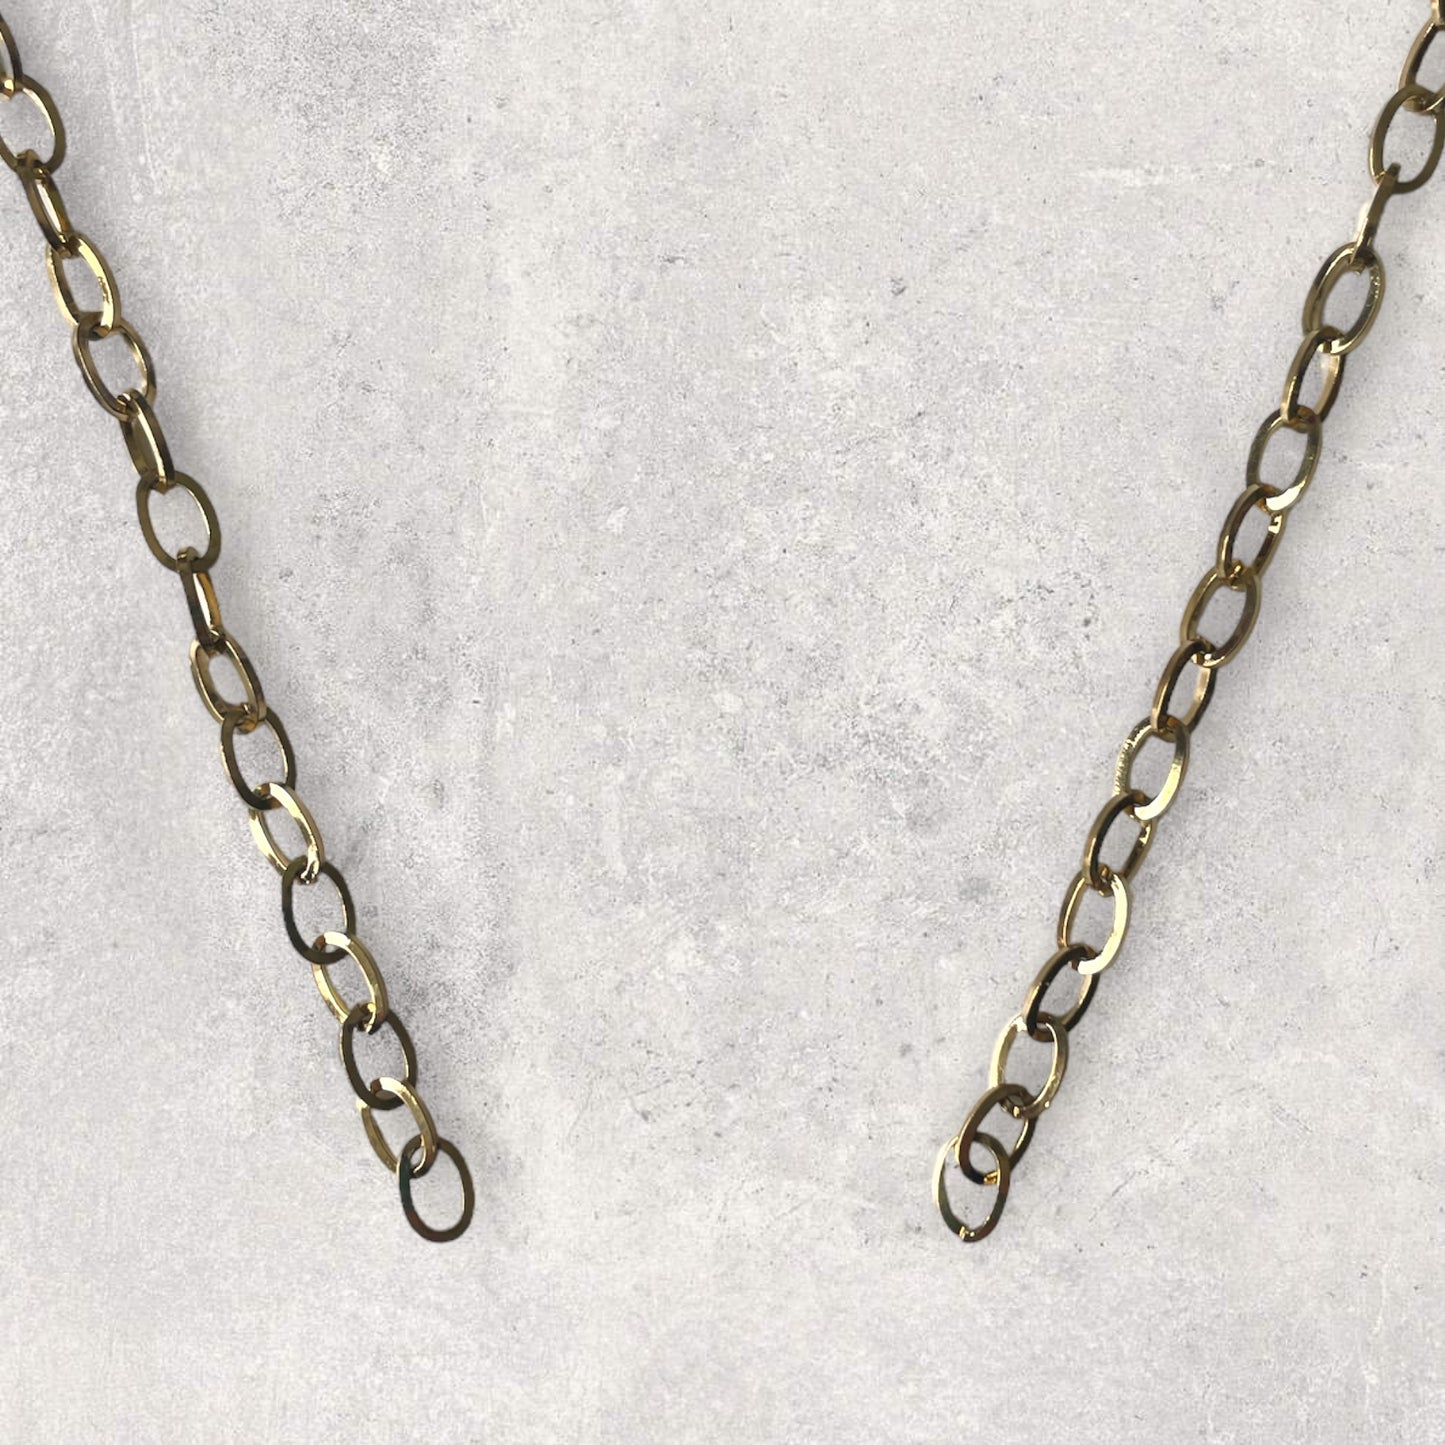 'COMBINED CHAIN' necklace DYO base OPEN